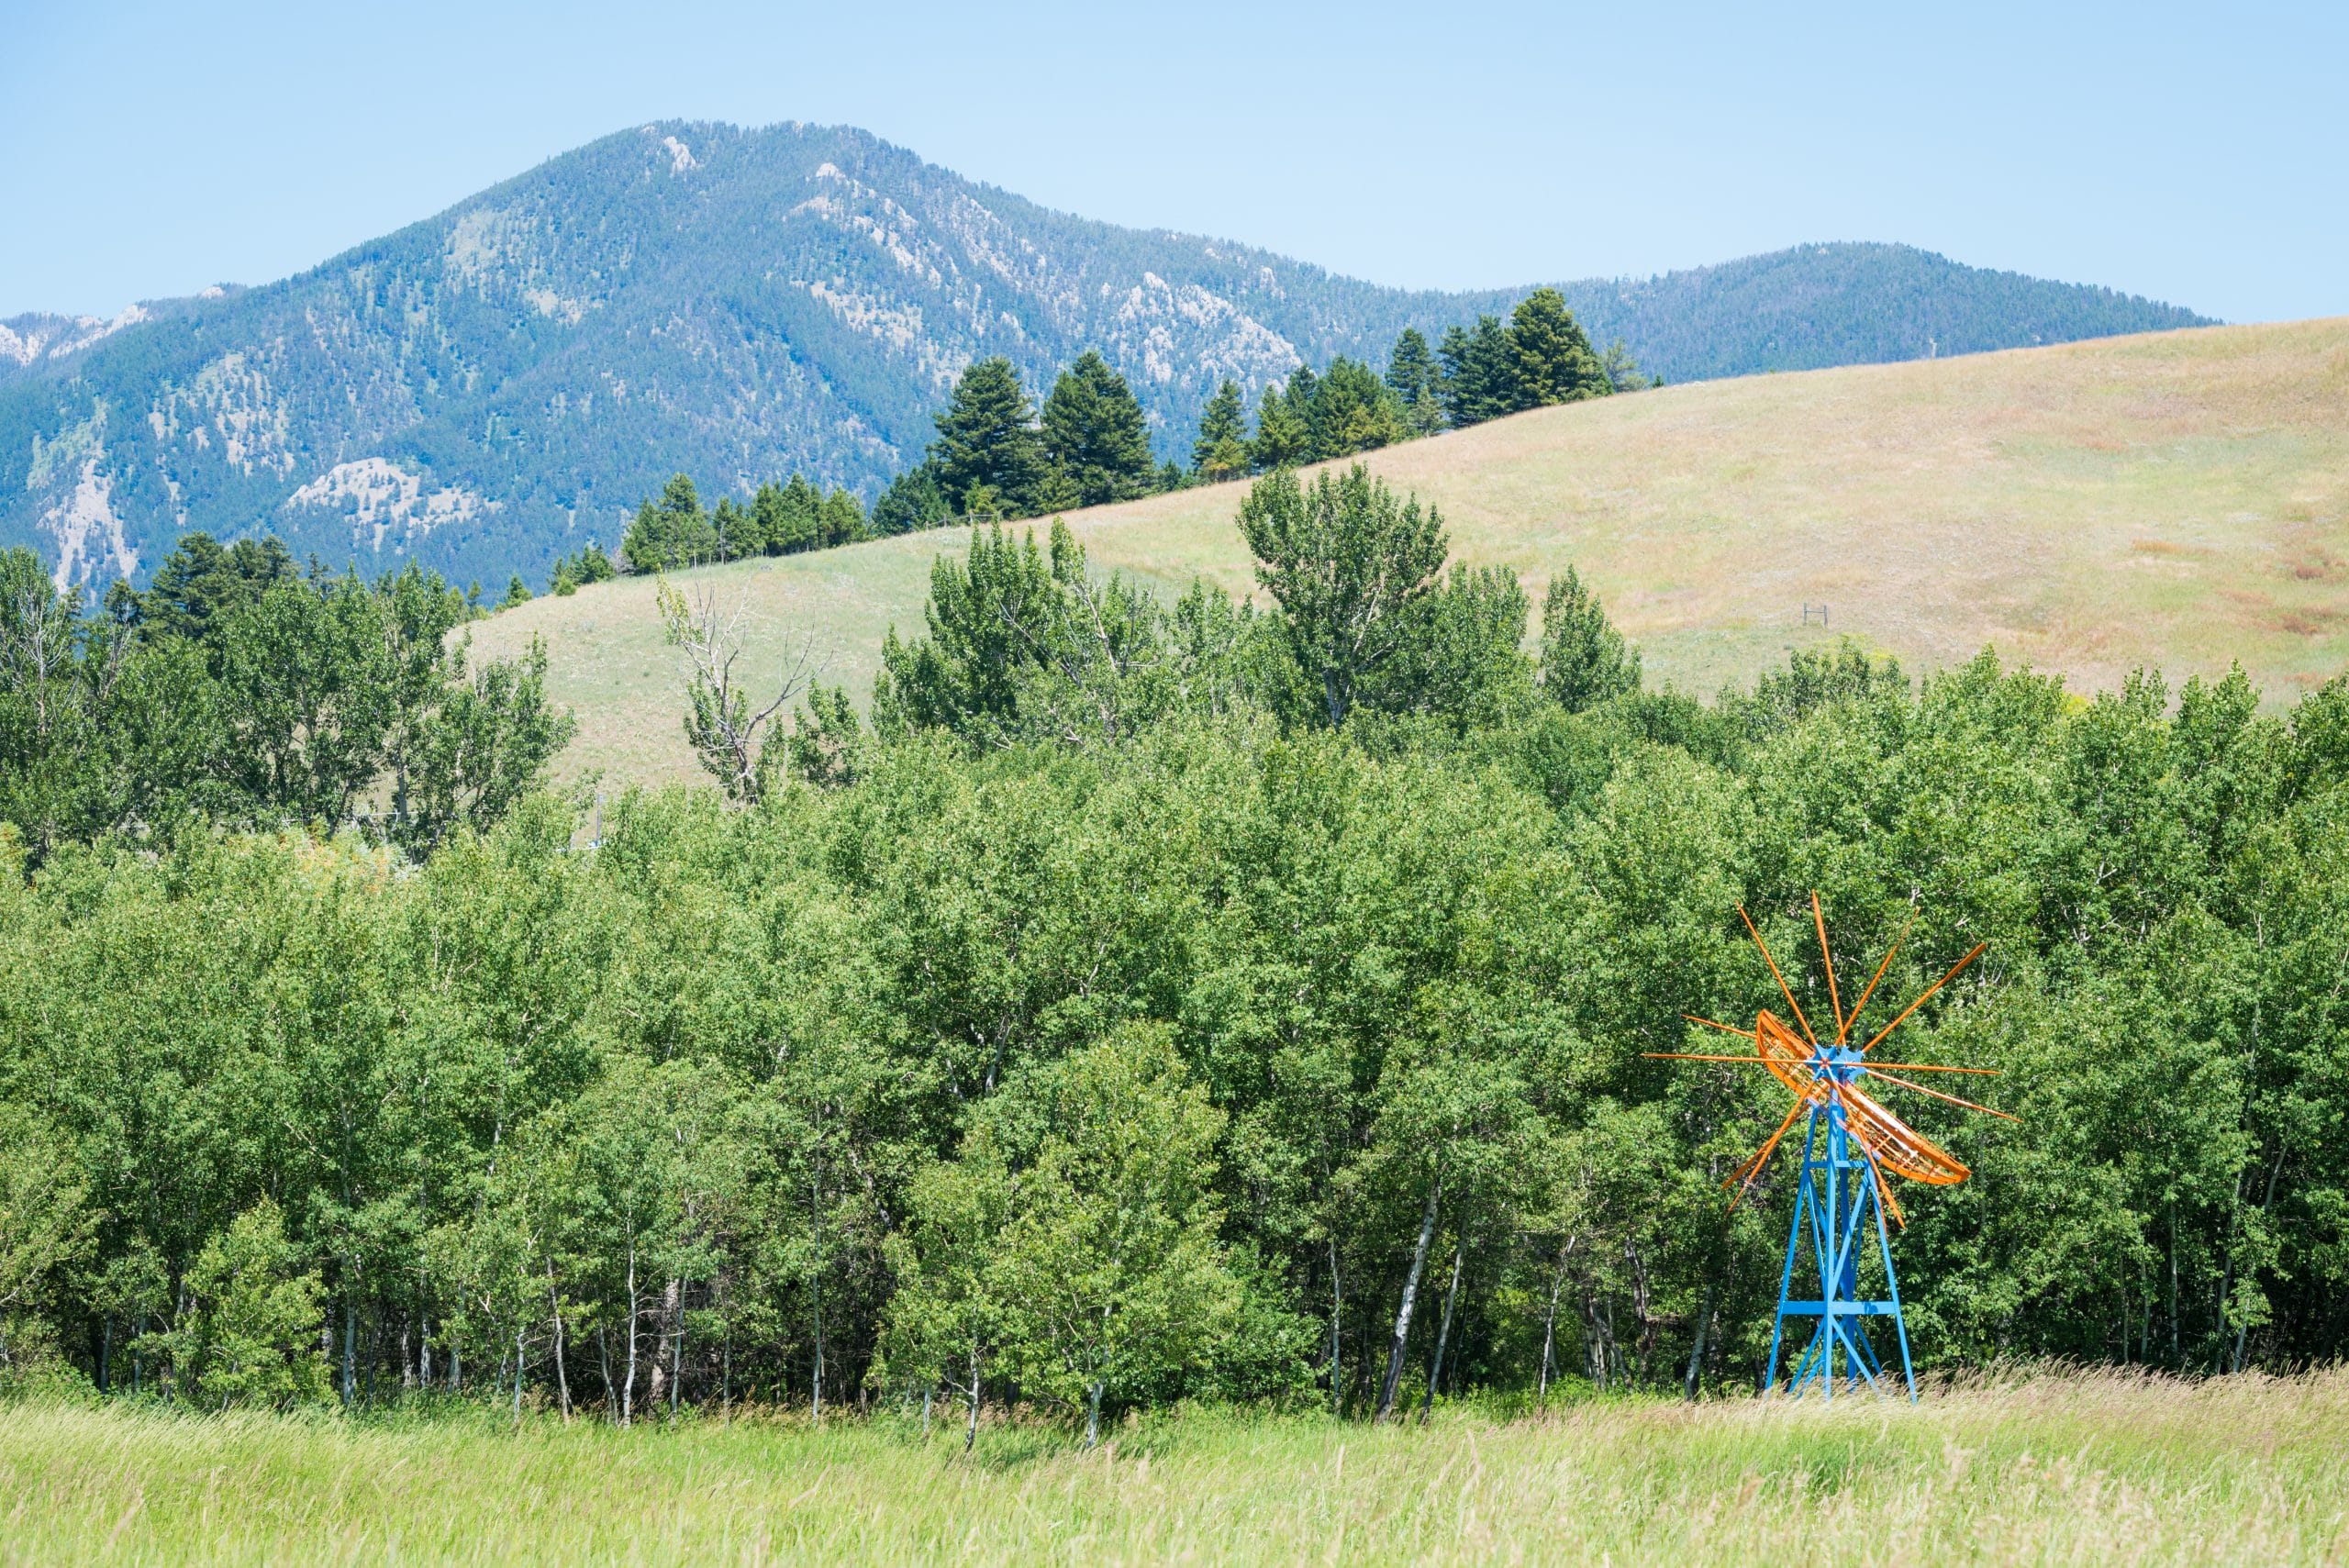 A windmill sculpture in front of trees and mountains